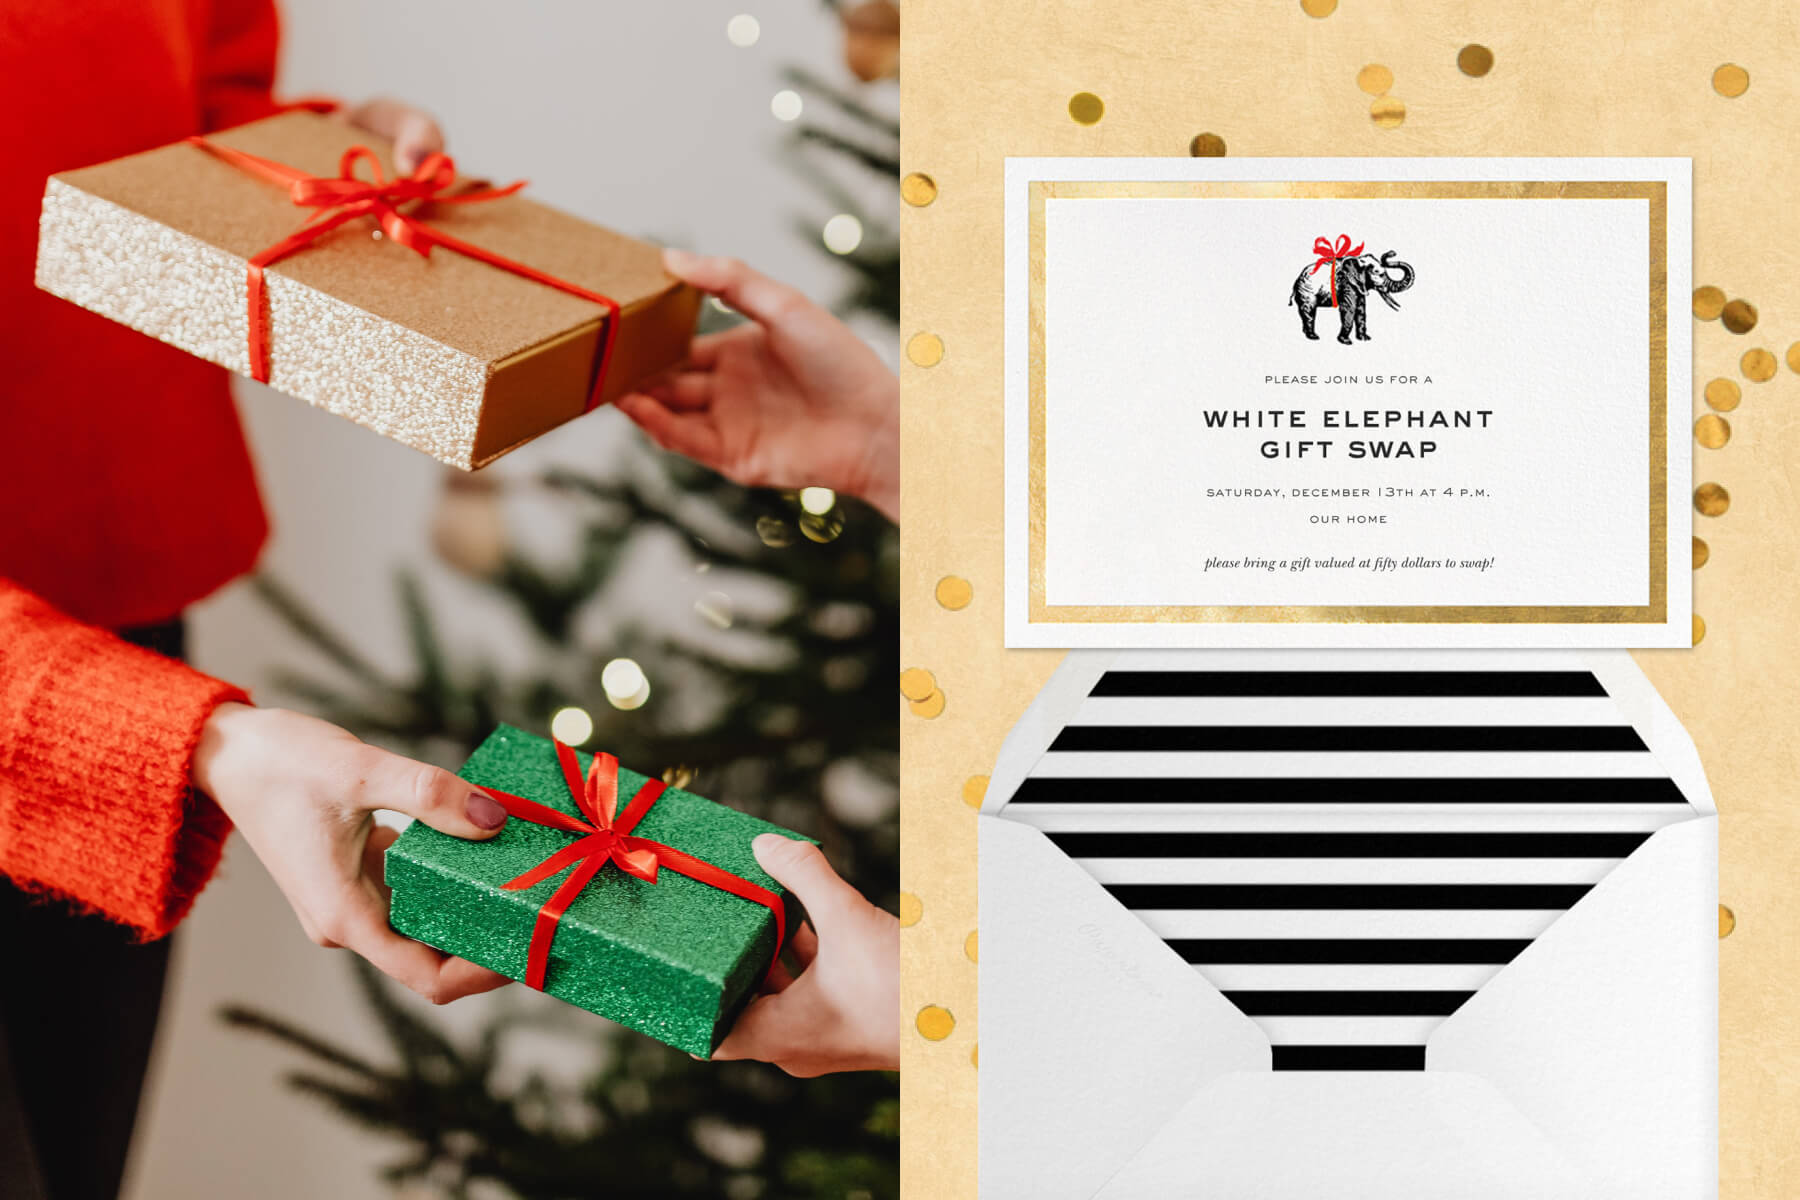 Left: A close-up photograph of the hands of two people exchanging presents; right: a white and gold invitation with an illustration of an elephant with a festive bow around its middle.